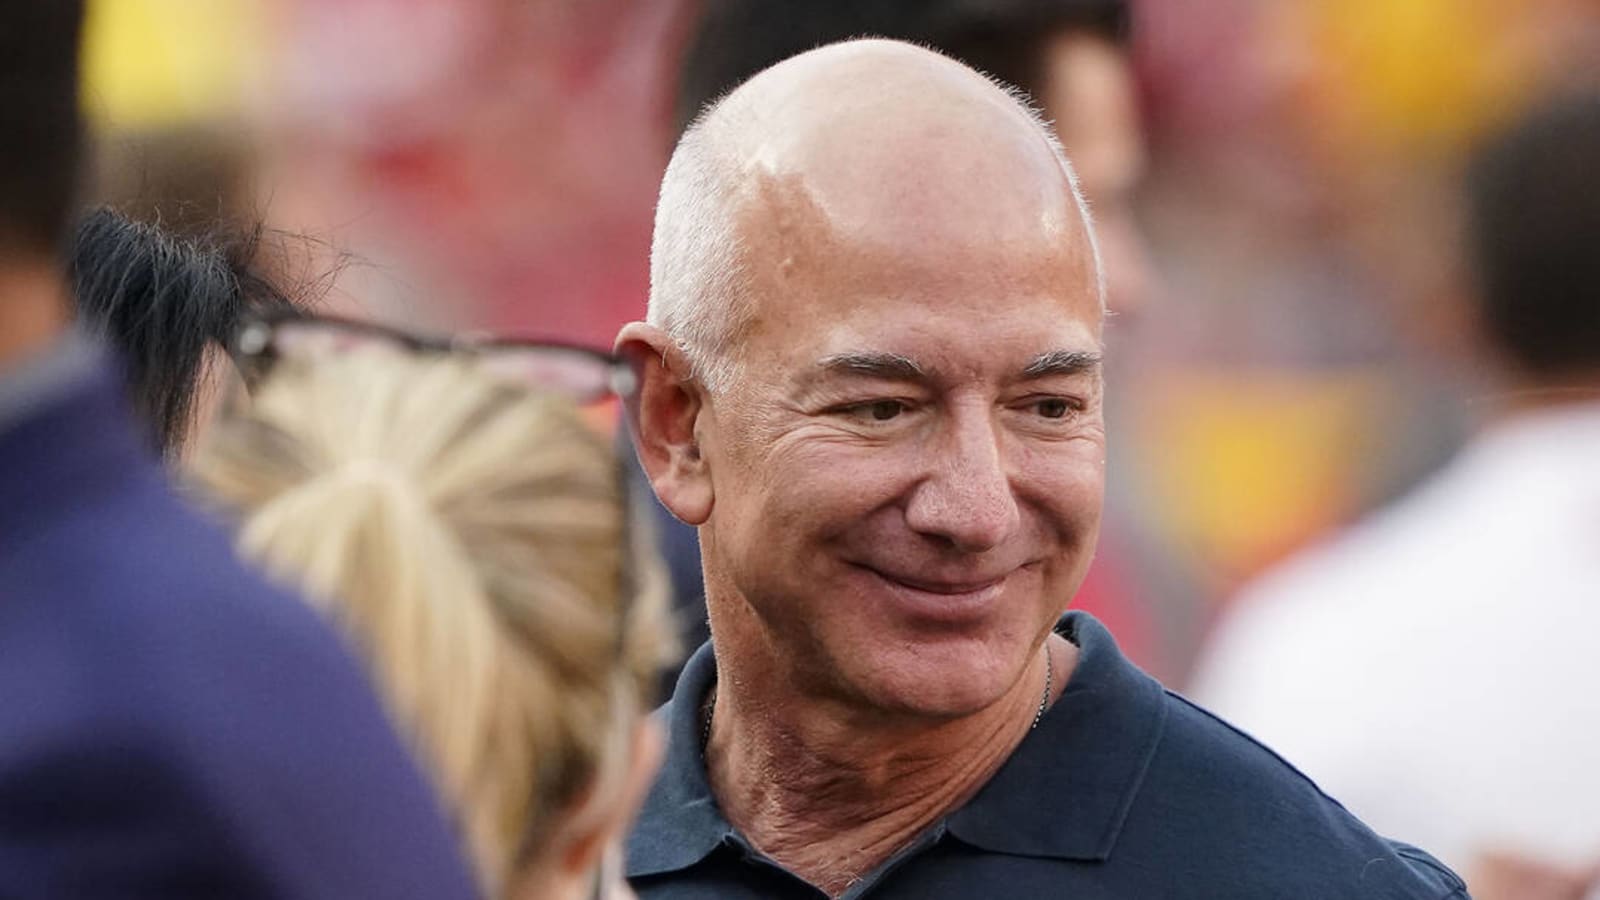 Bezos reportedly has not placed bid on Commanders